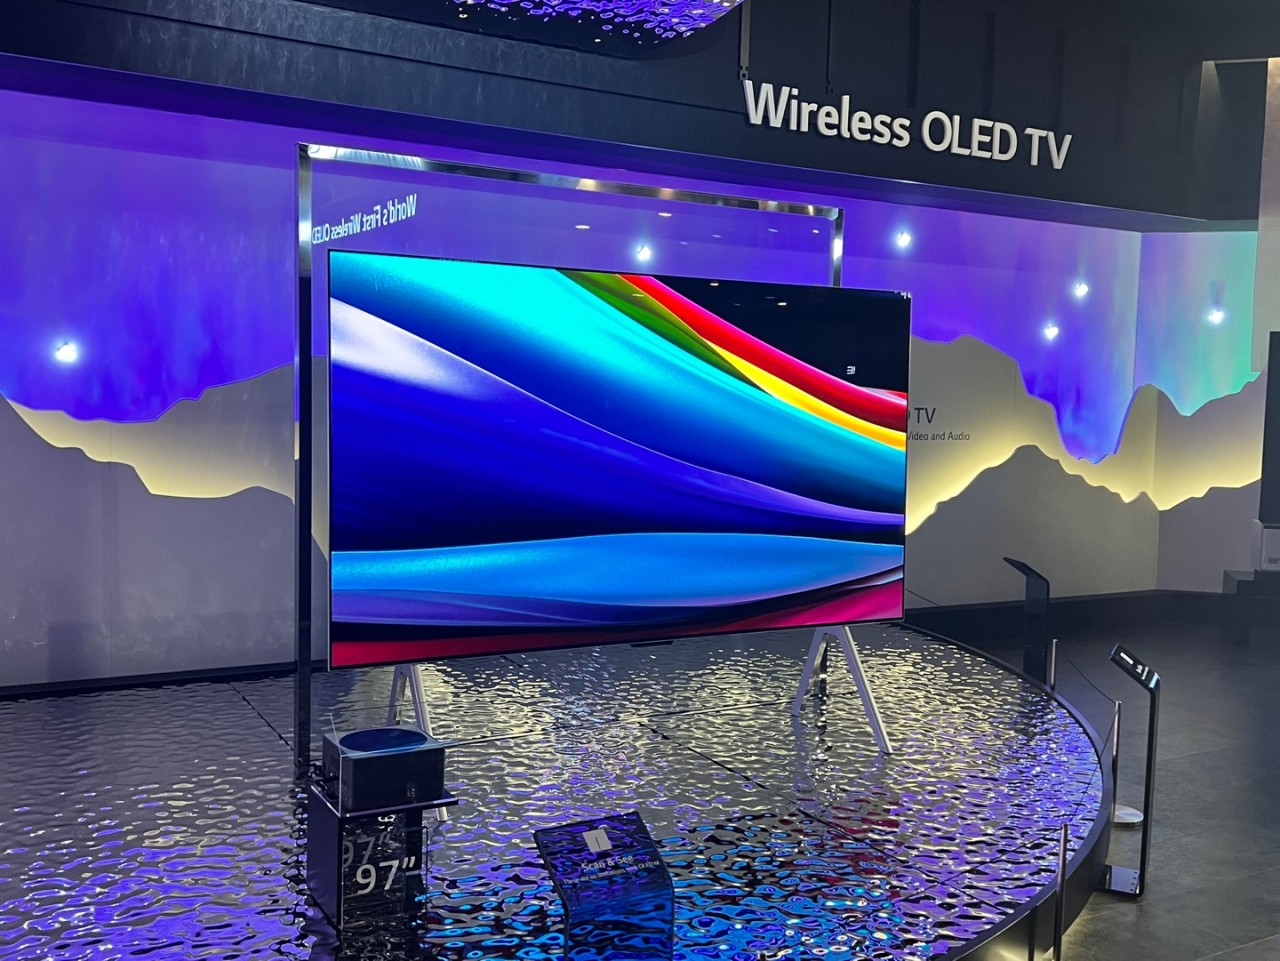 Wireless OLED TV is displayed at Samsung Electronics showroom at Consumer Electronics Show in Las Vegas in US. (Jo He-rim/The Korea Herald)